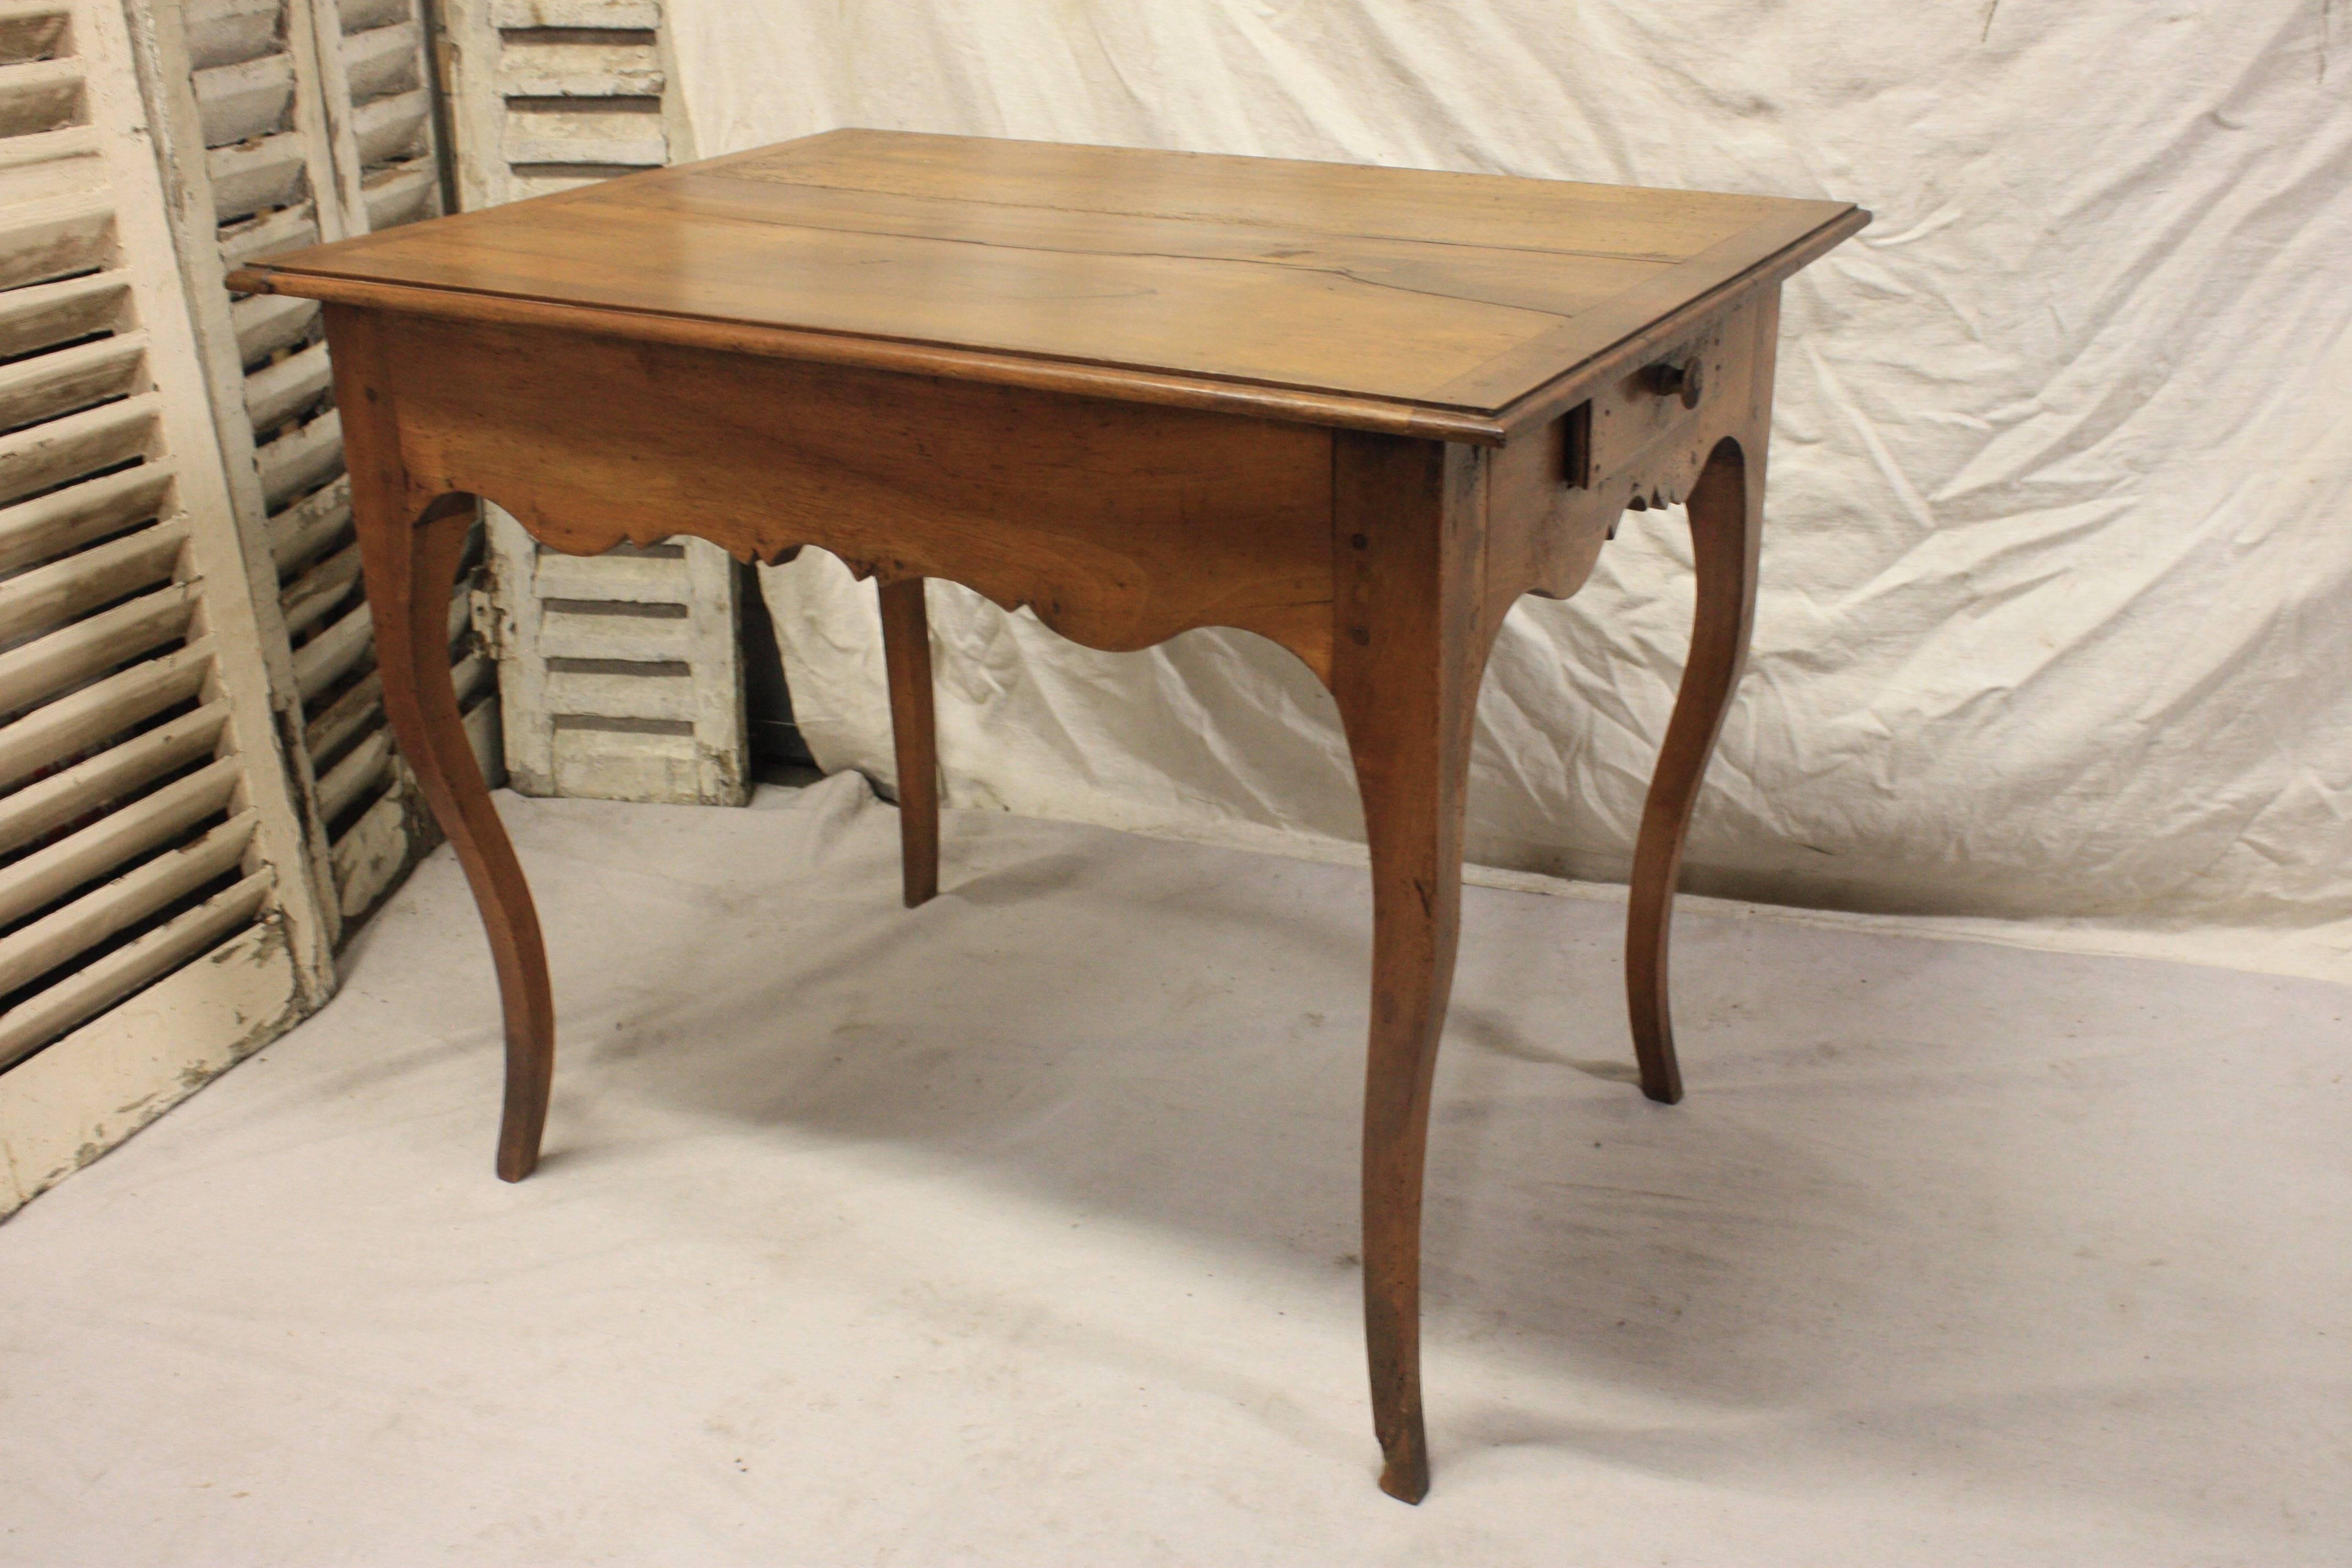 Charming 19th century French provincial table.